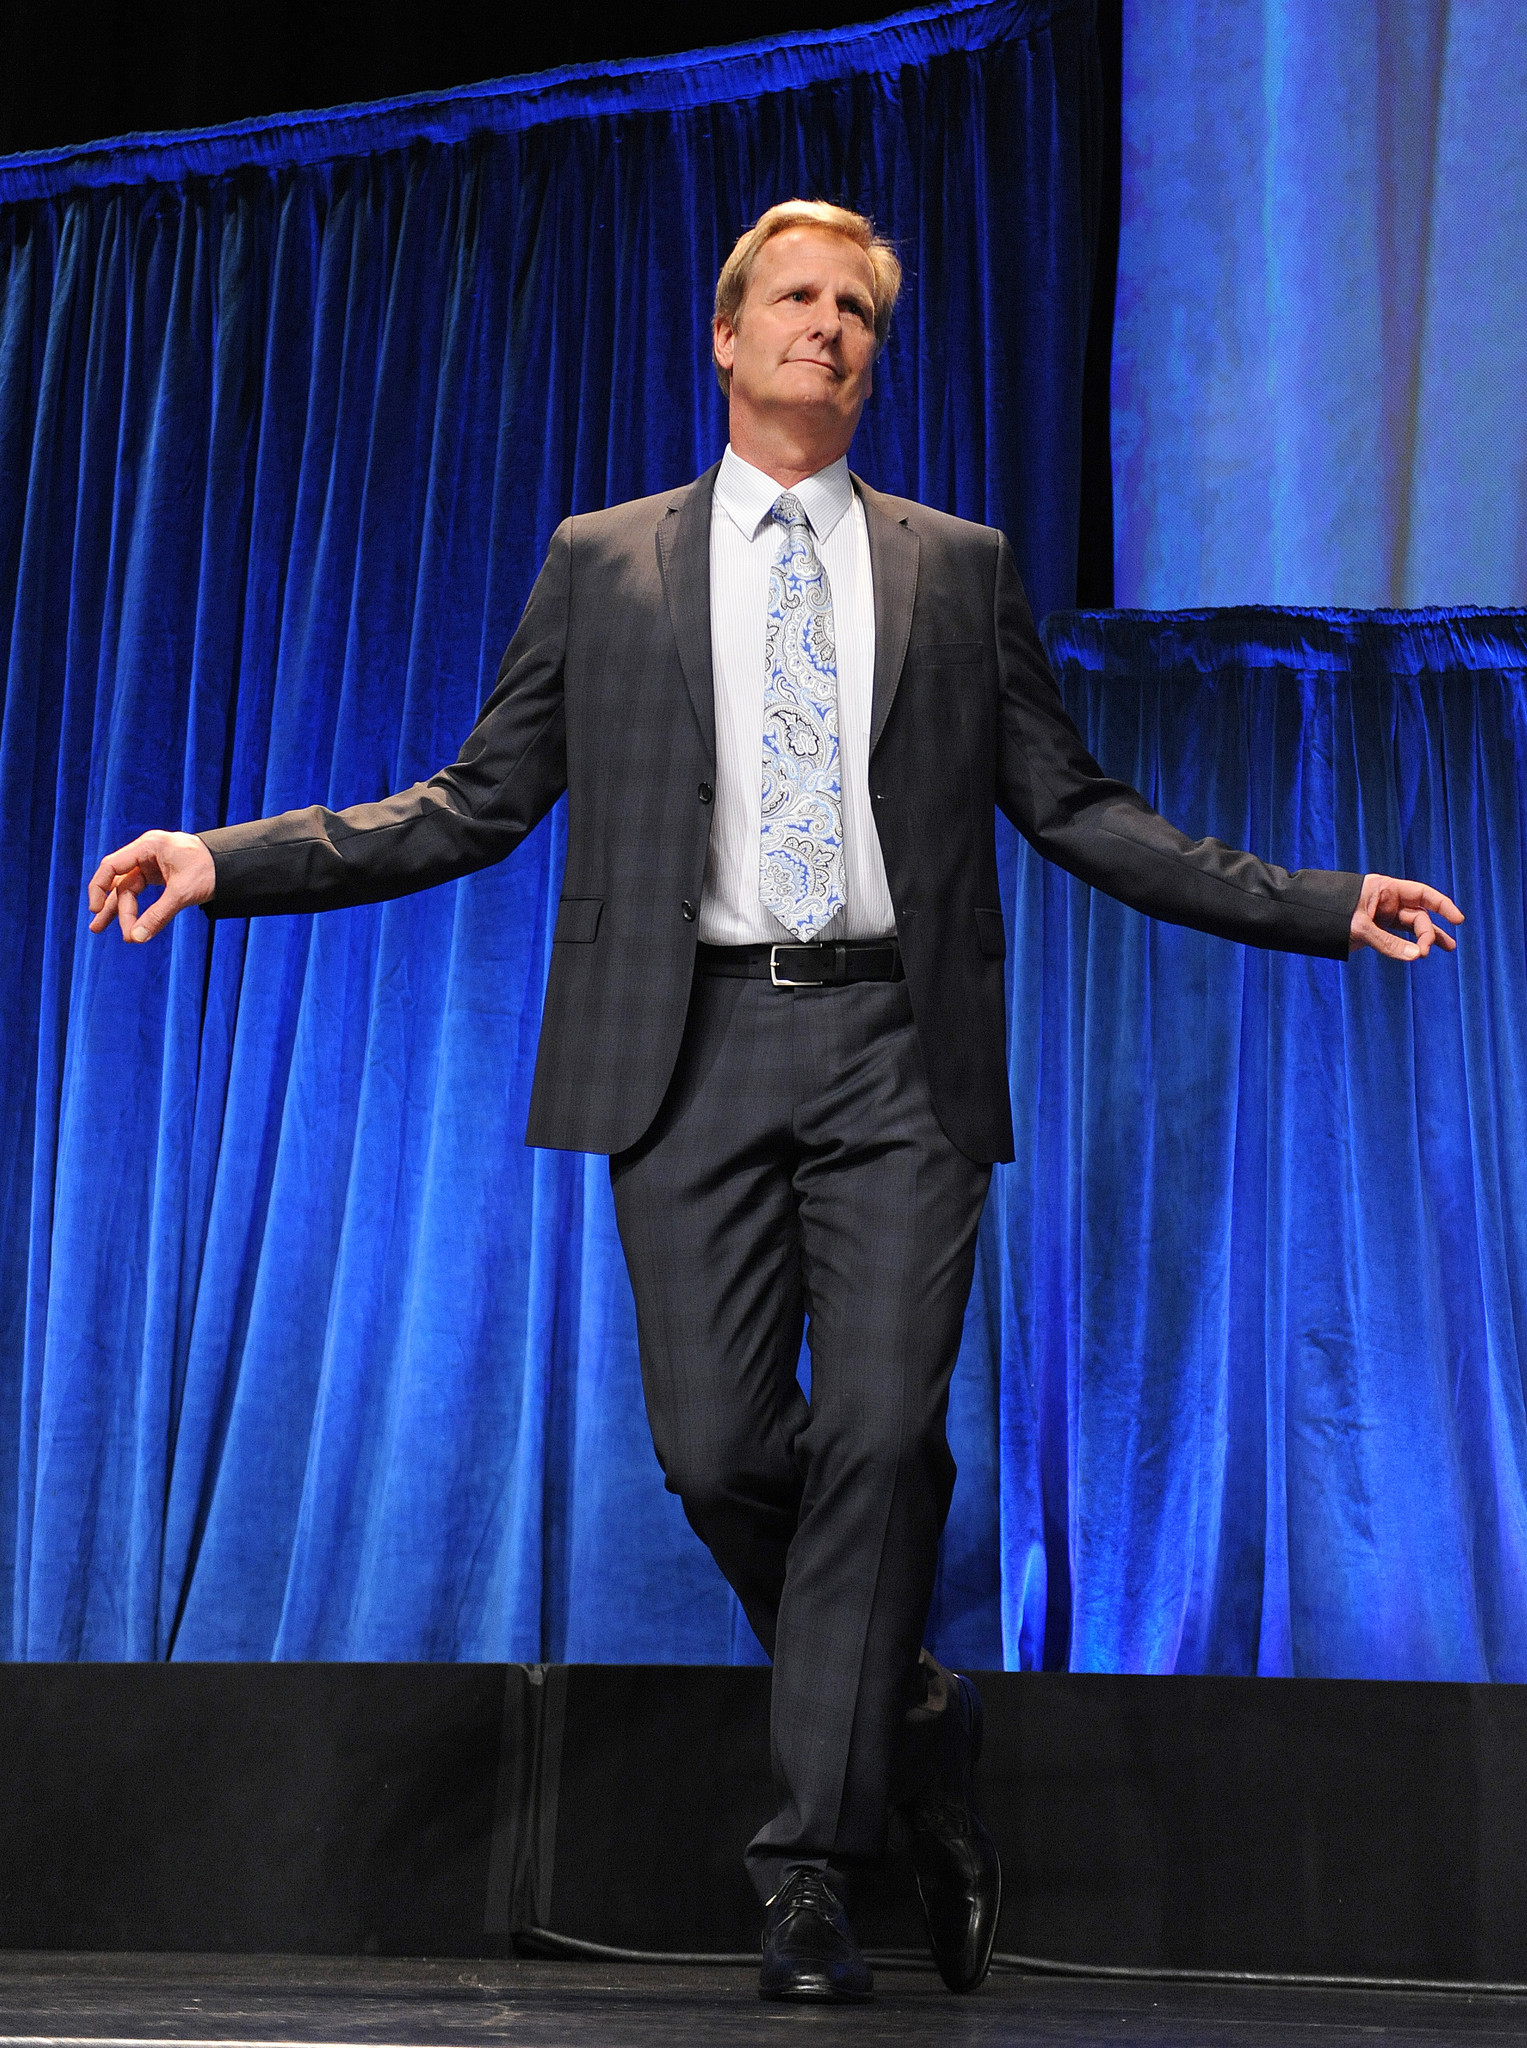 Jeff Daniels at event of The Newsroom (2012)